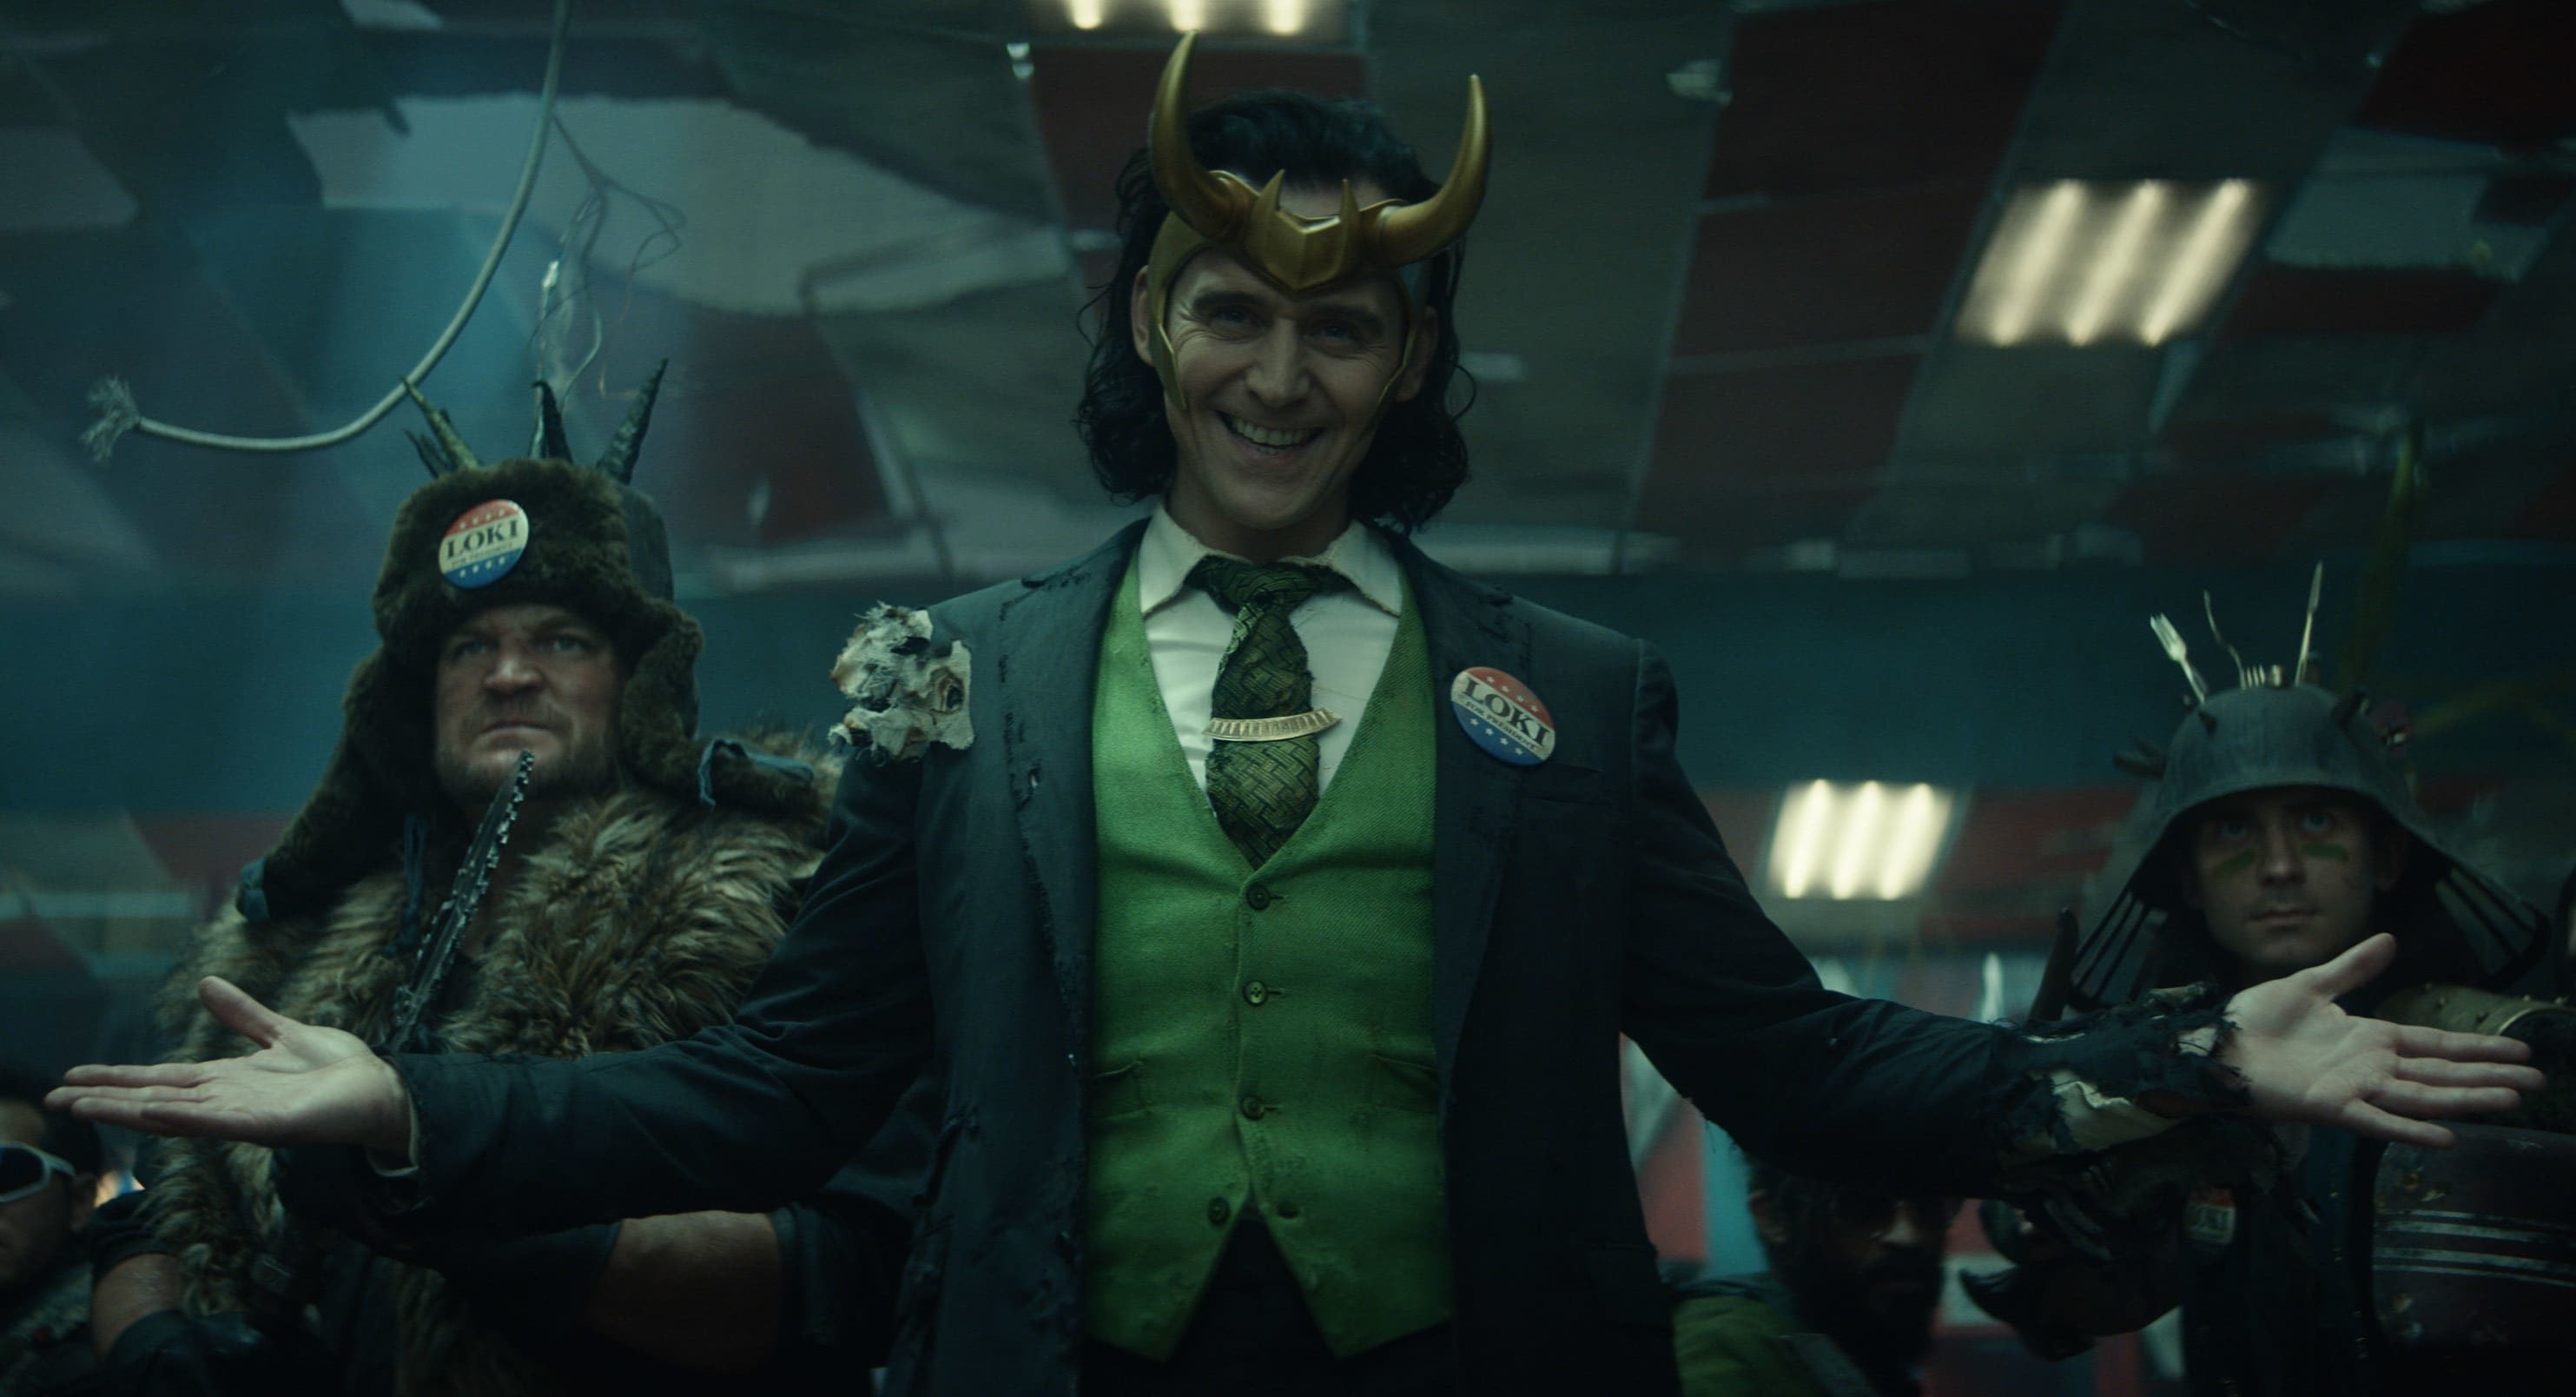 What To Know About Loki If You’ve Only Seen 1.5 Marvel Movies & Need A Quick Update